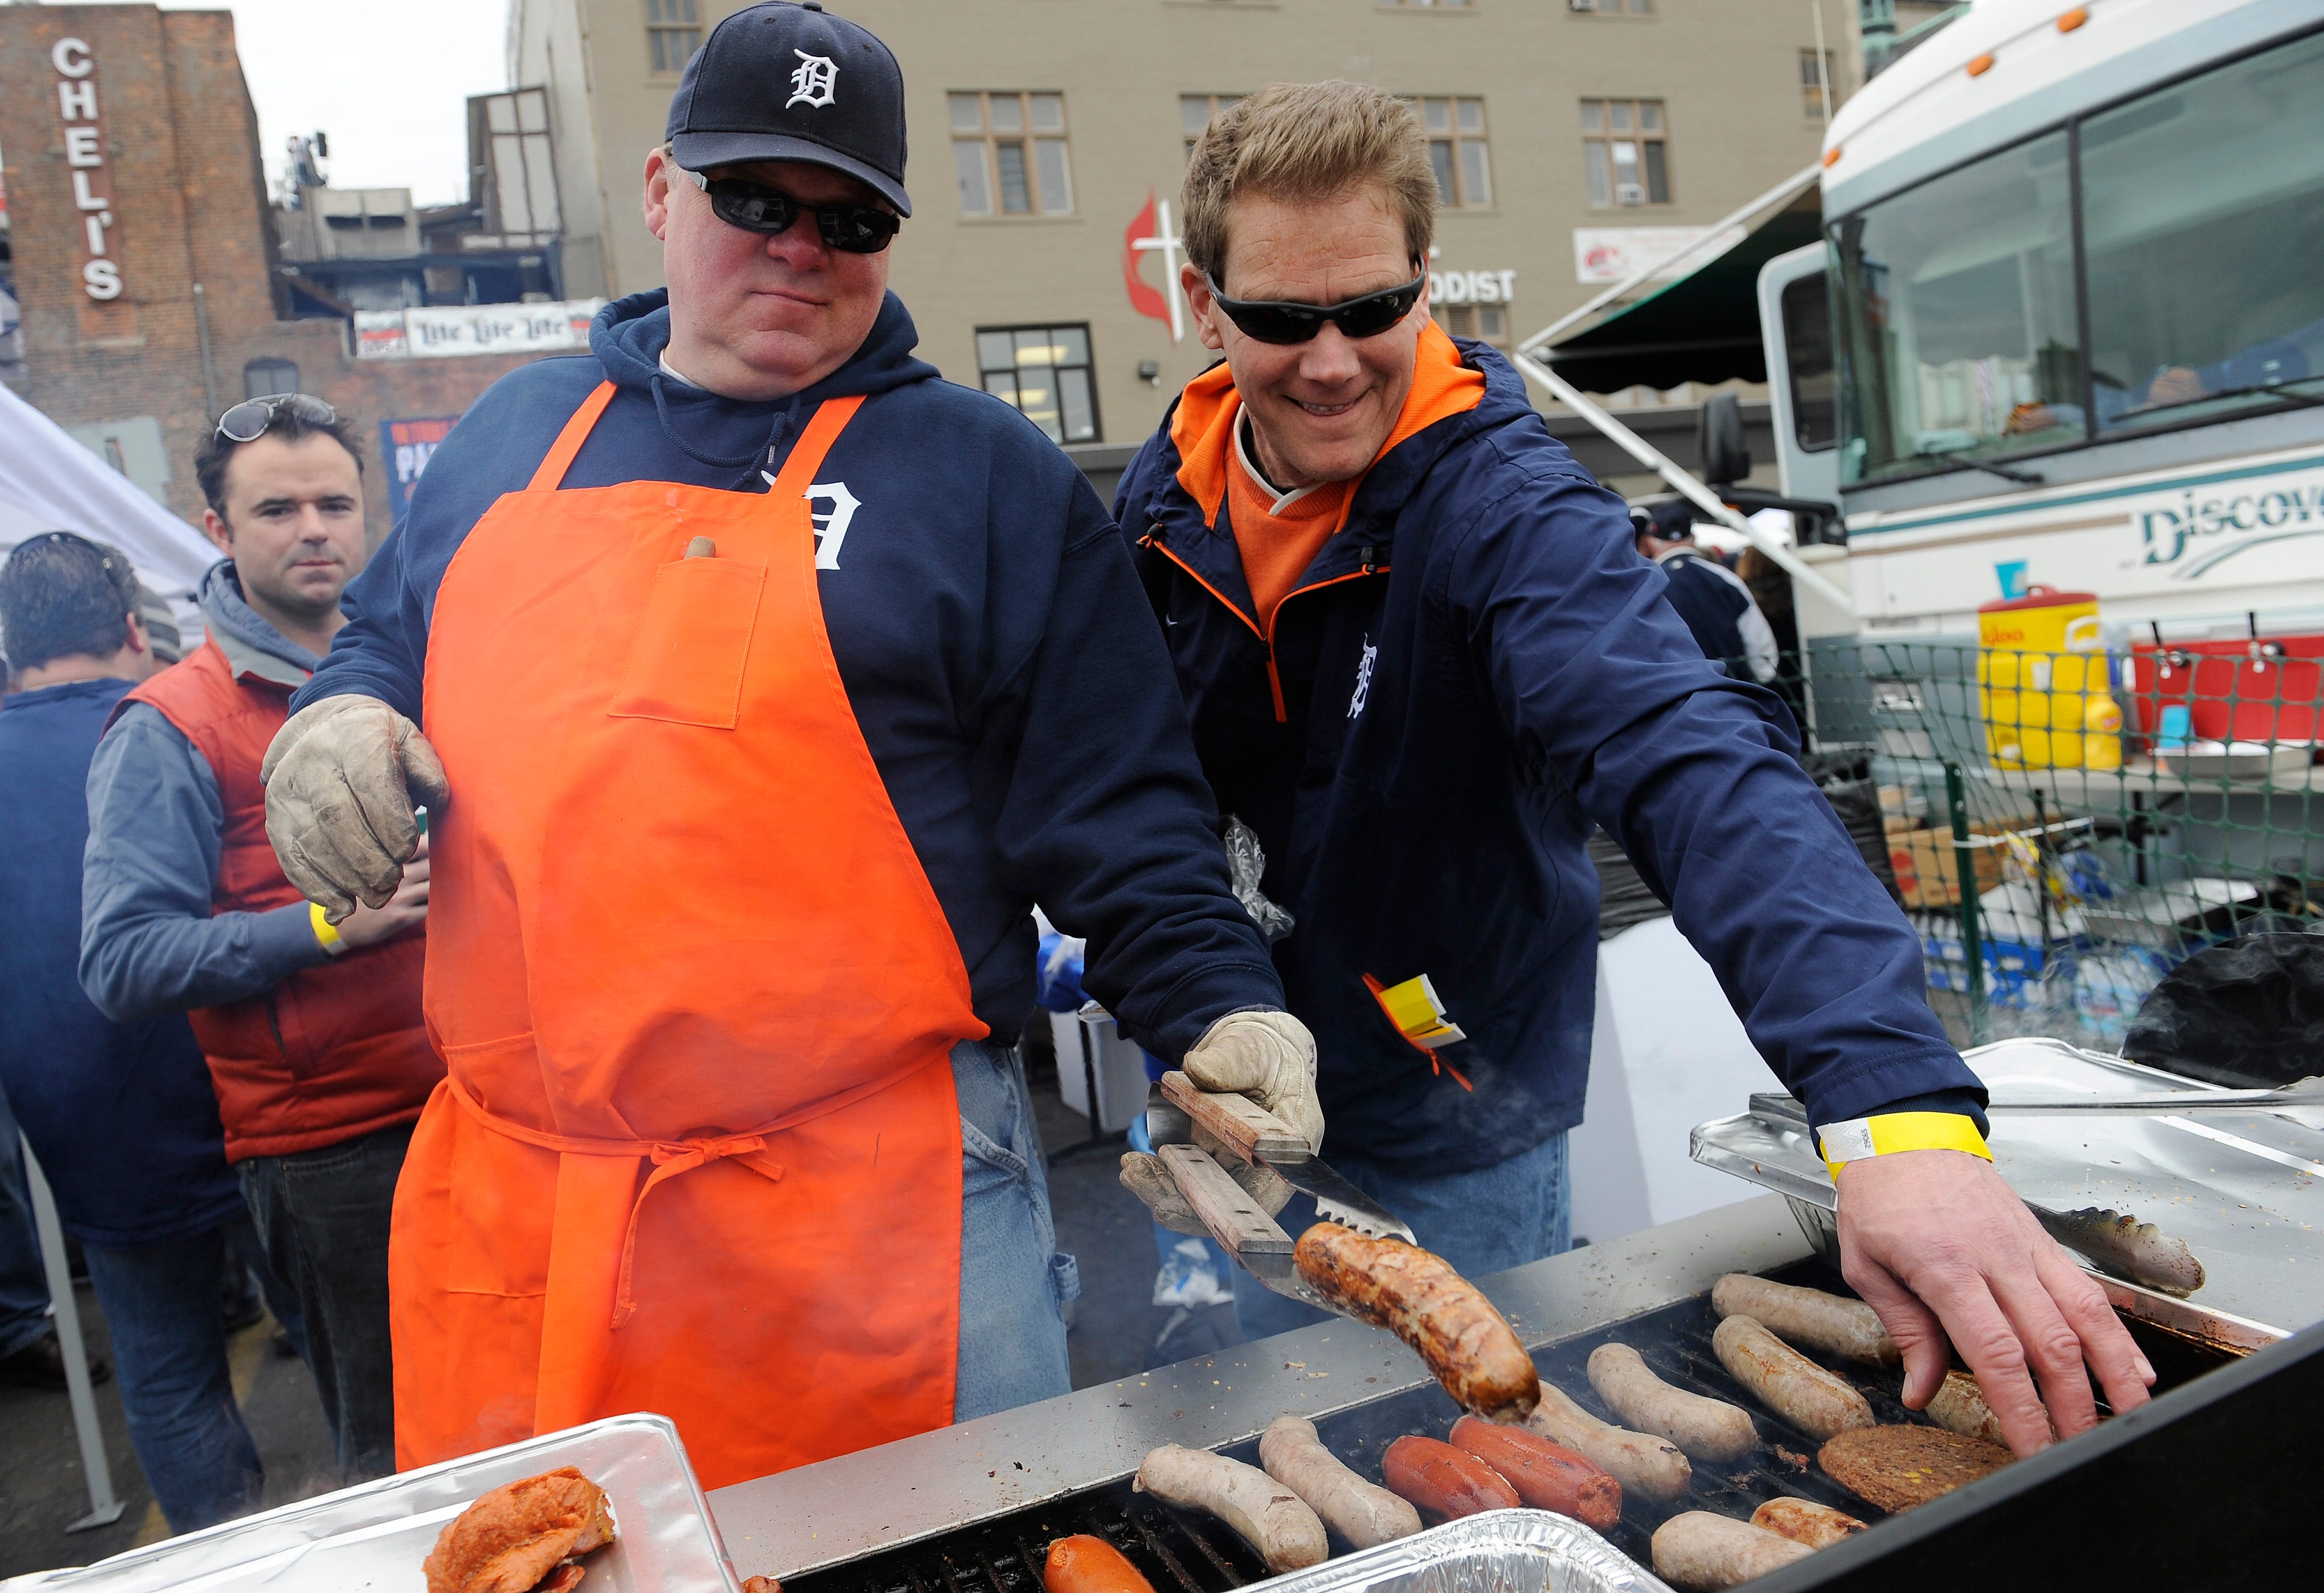 l-r, John Stasie of Commerce Twp. and Douglas Wehner of Ferndale grill some brats and hot sausage during their tailgate party. Detroit Tigers Opening Day at Comerica Park, Detroit, MI.